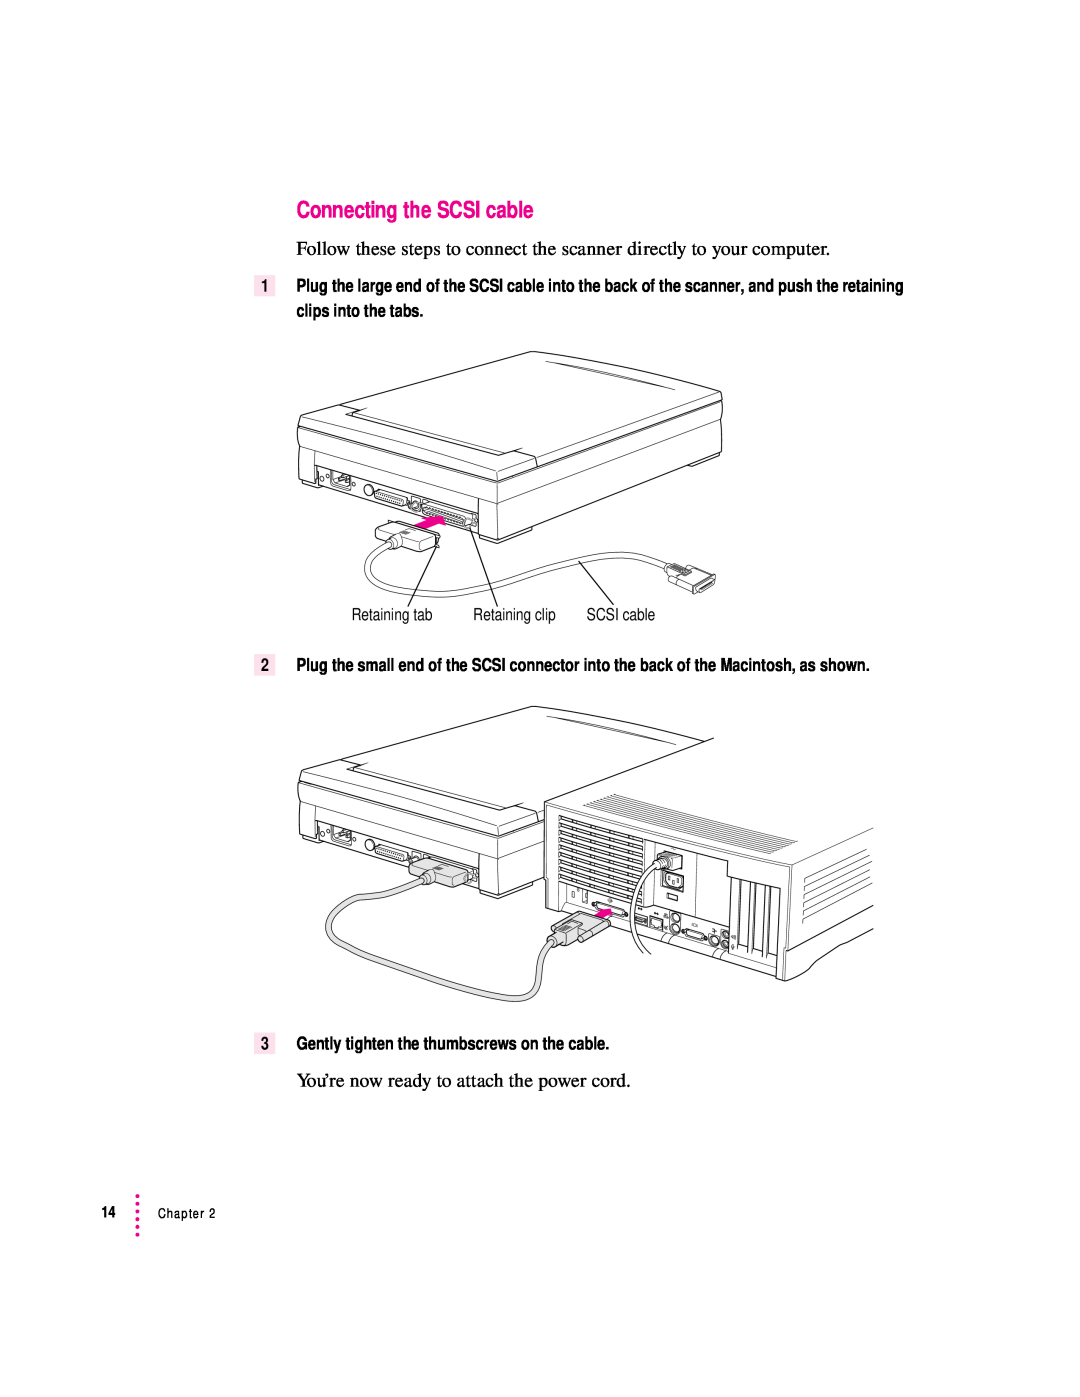 Apple 627, 1230 user manual Connecting the SCSI cable, Follow these steps to connect the scanner directly to your computer 